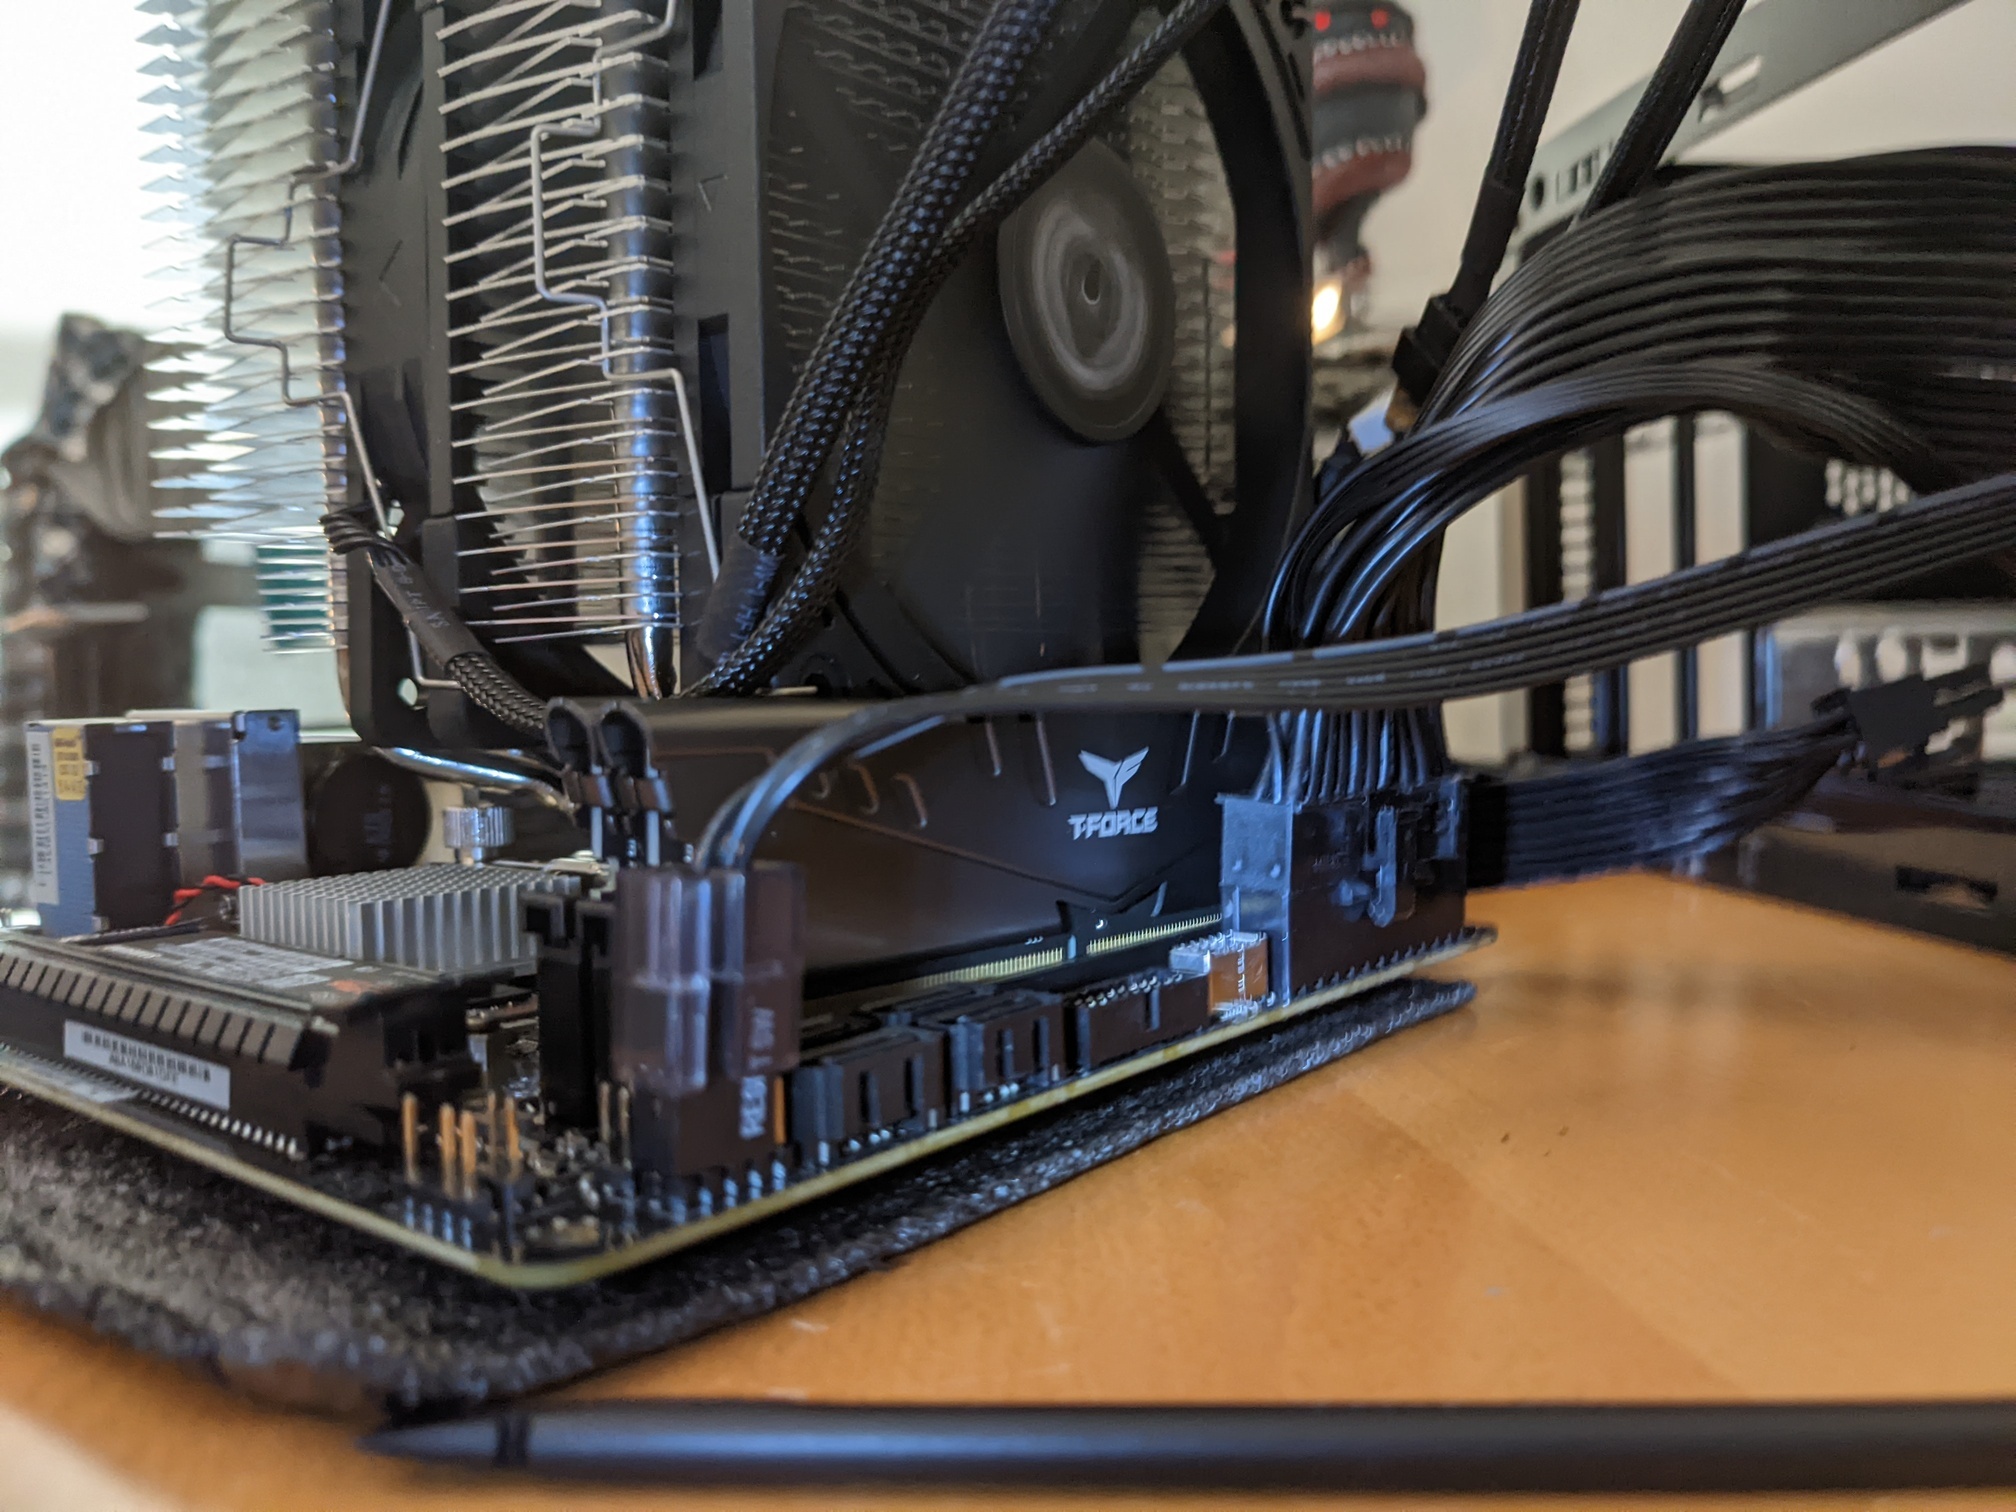 A half-assembled motherboard with a cooler and some RAM sticks and cables.